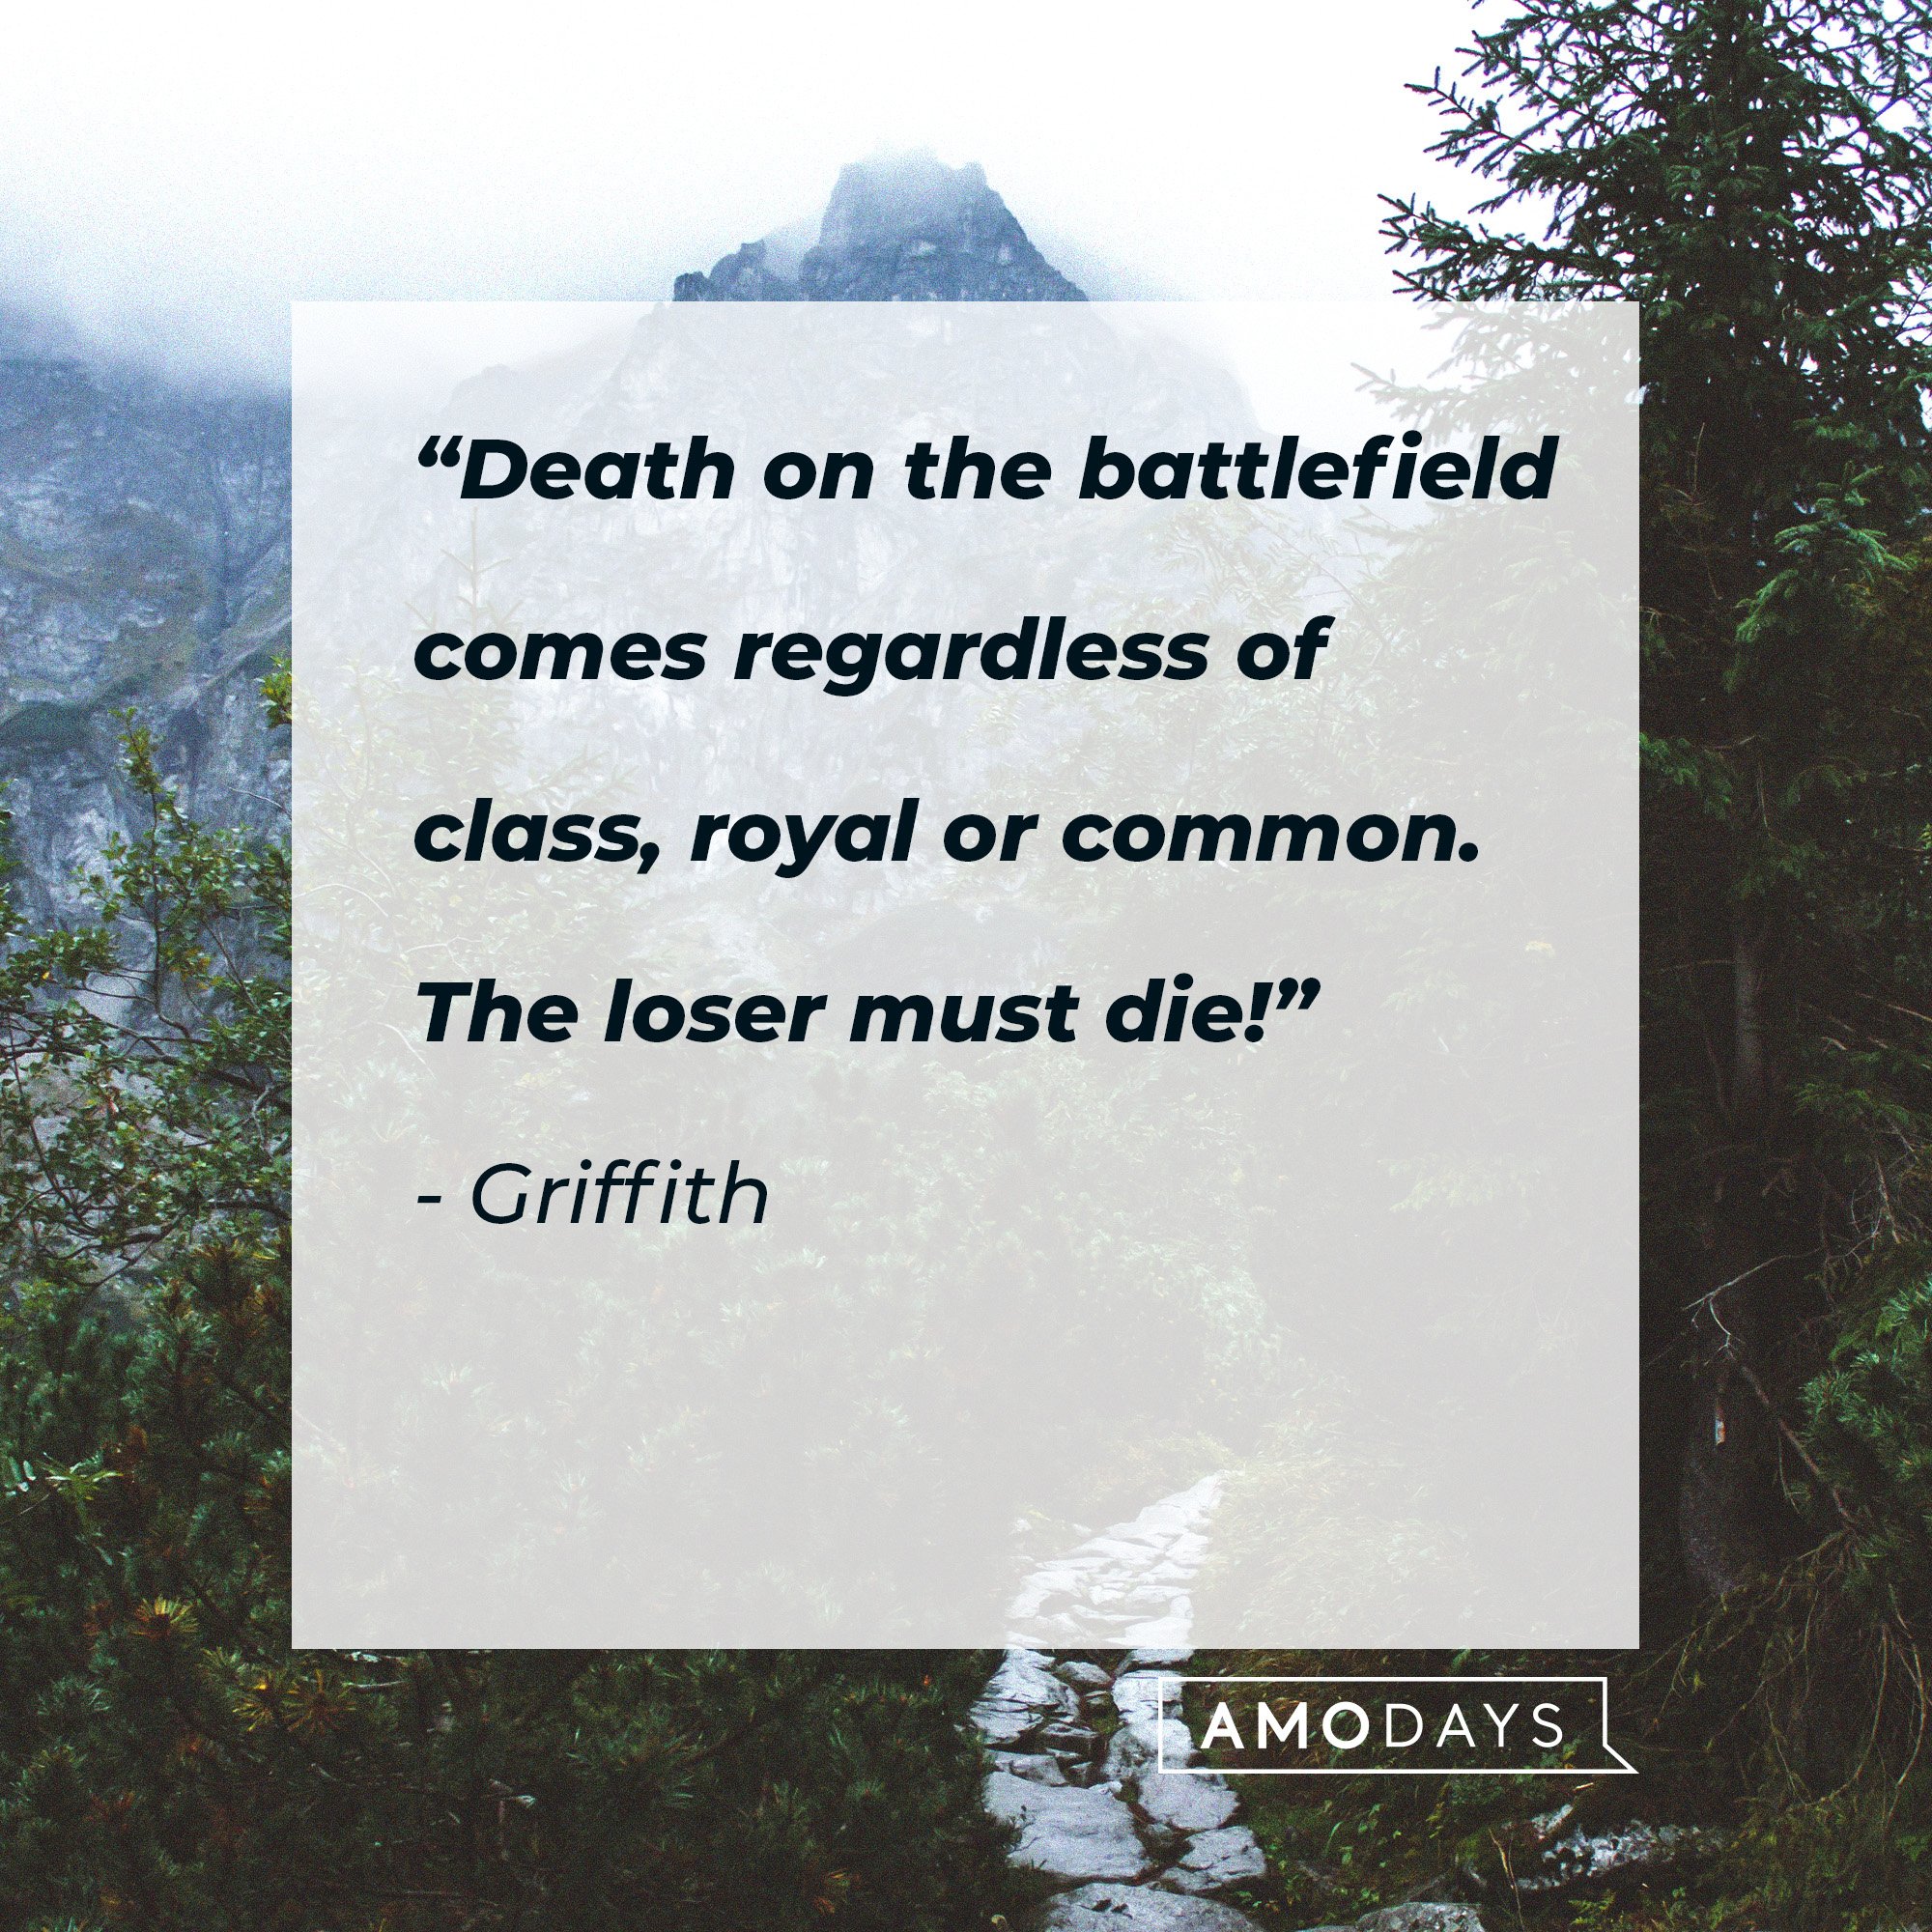 Griffith's quote: “Death on the battlefield comes regardless of class, royal or common. The loser must die!” | Image: AmoDays